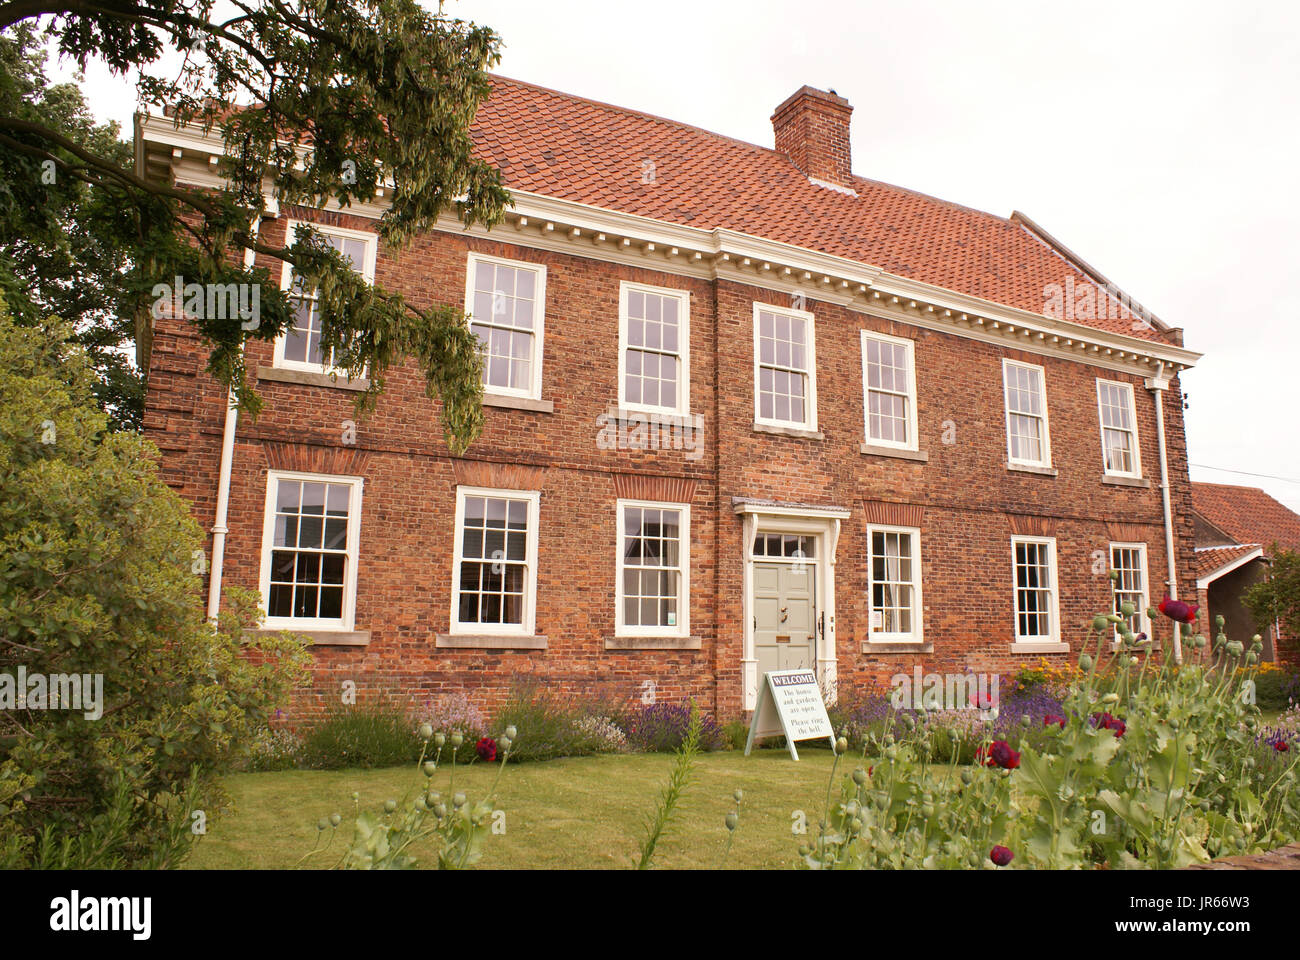 Old Rectory, Epworth, Lincolnshire Stockfoto